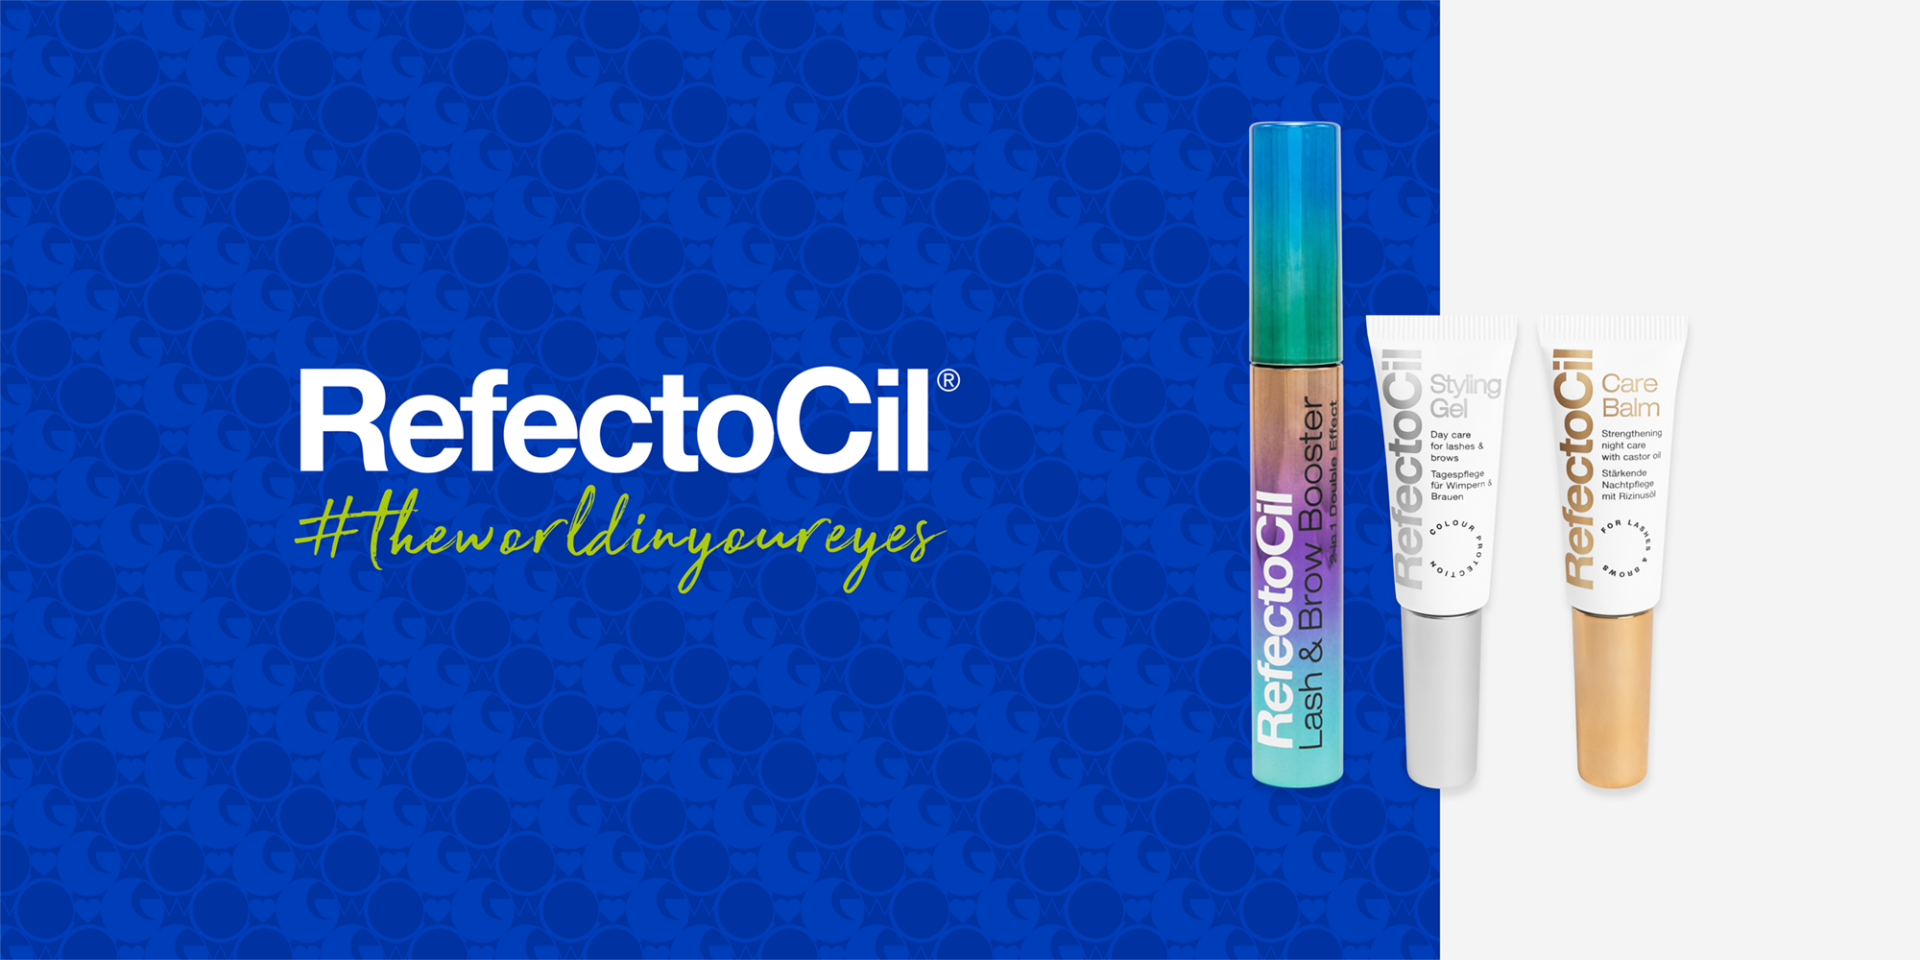 Enjoy a spa-day at home with the RefectoCil Care range for brows and lashes 2